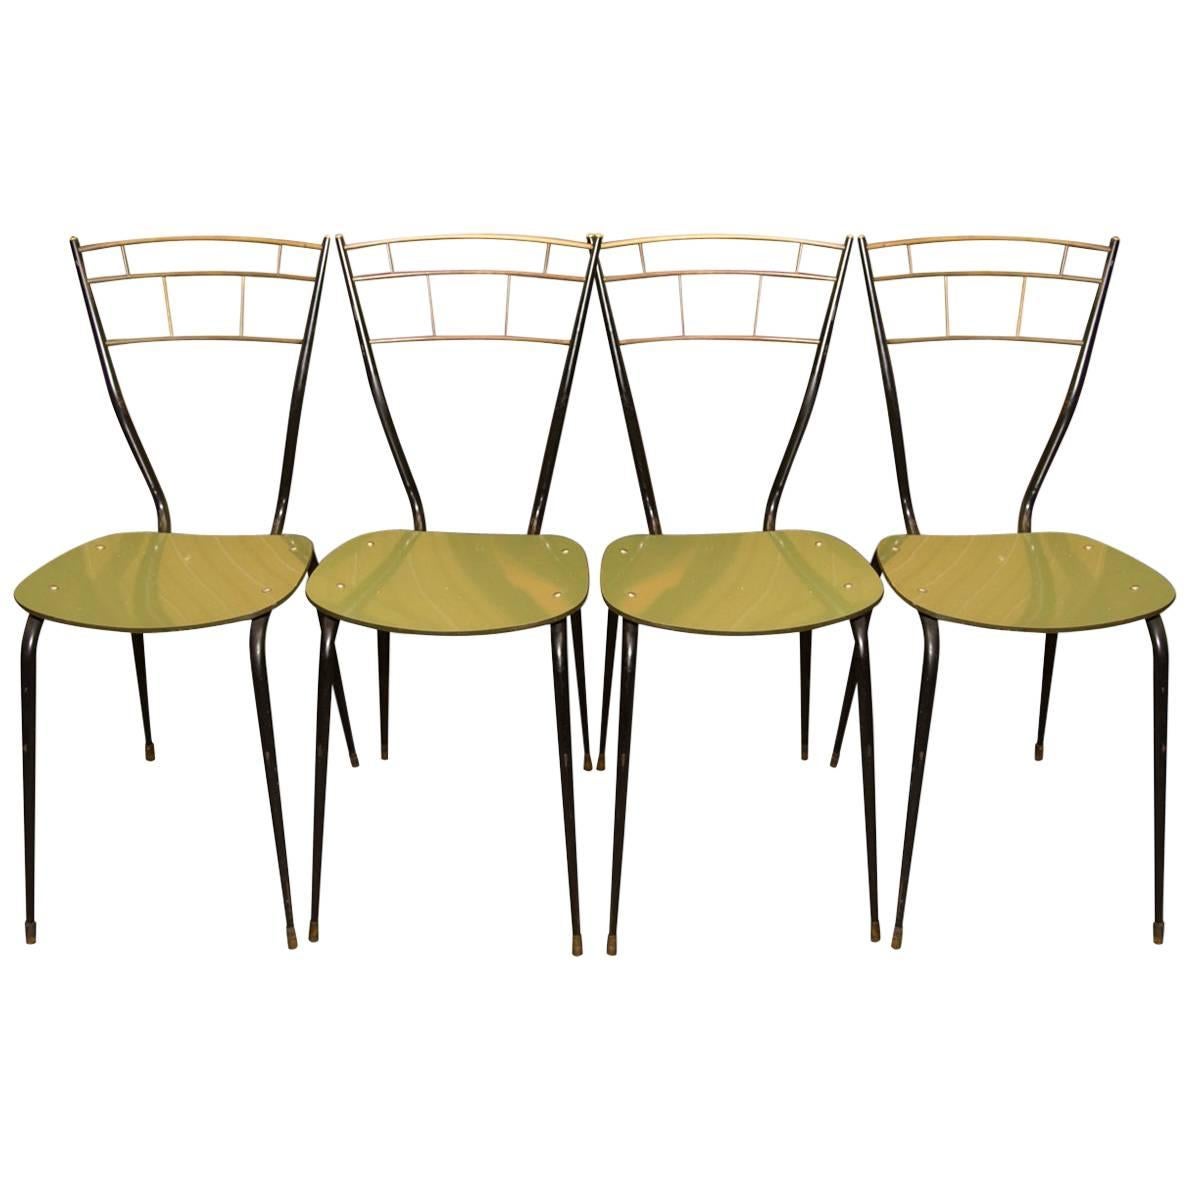 Italian Midcentury Dining Chairs with Laminate Seats, Set of Four 